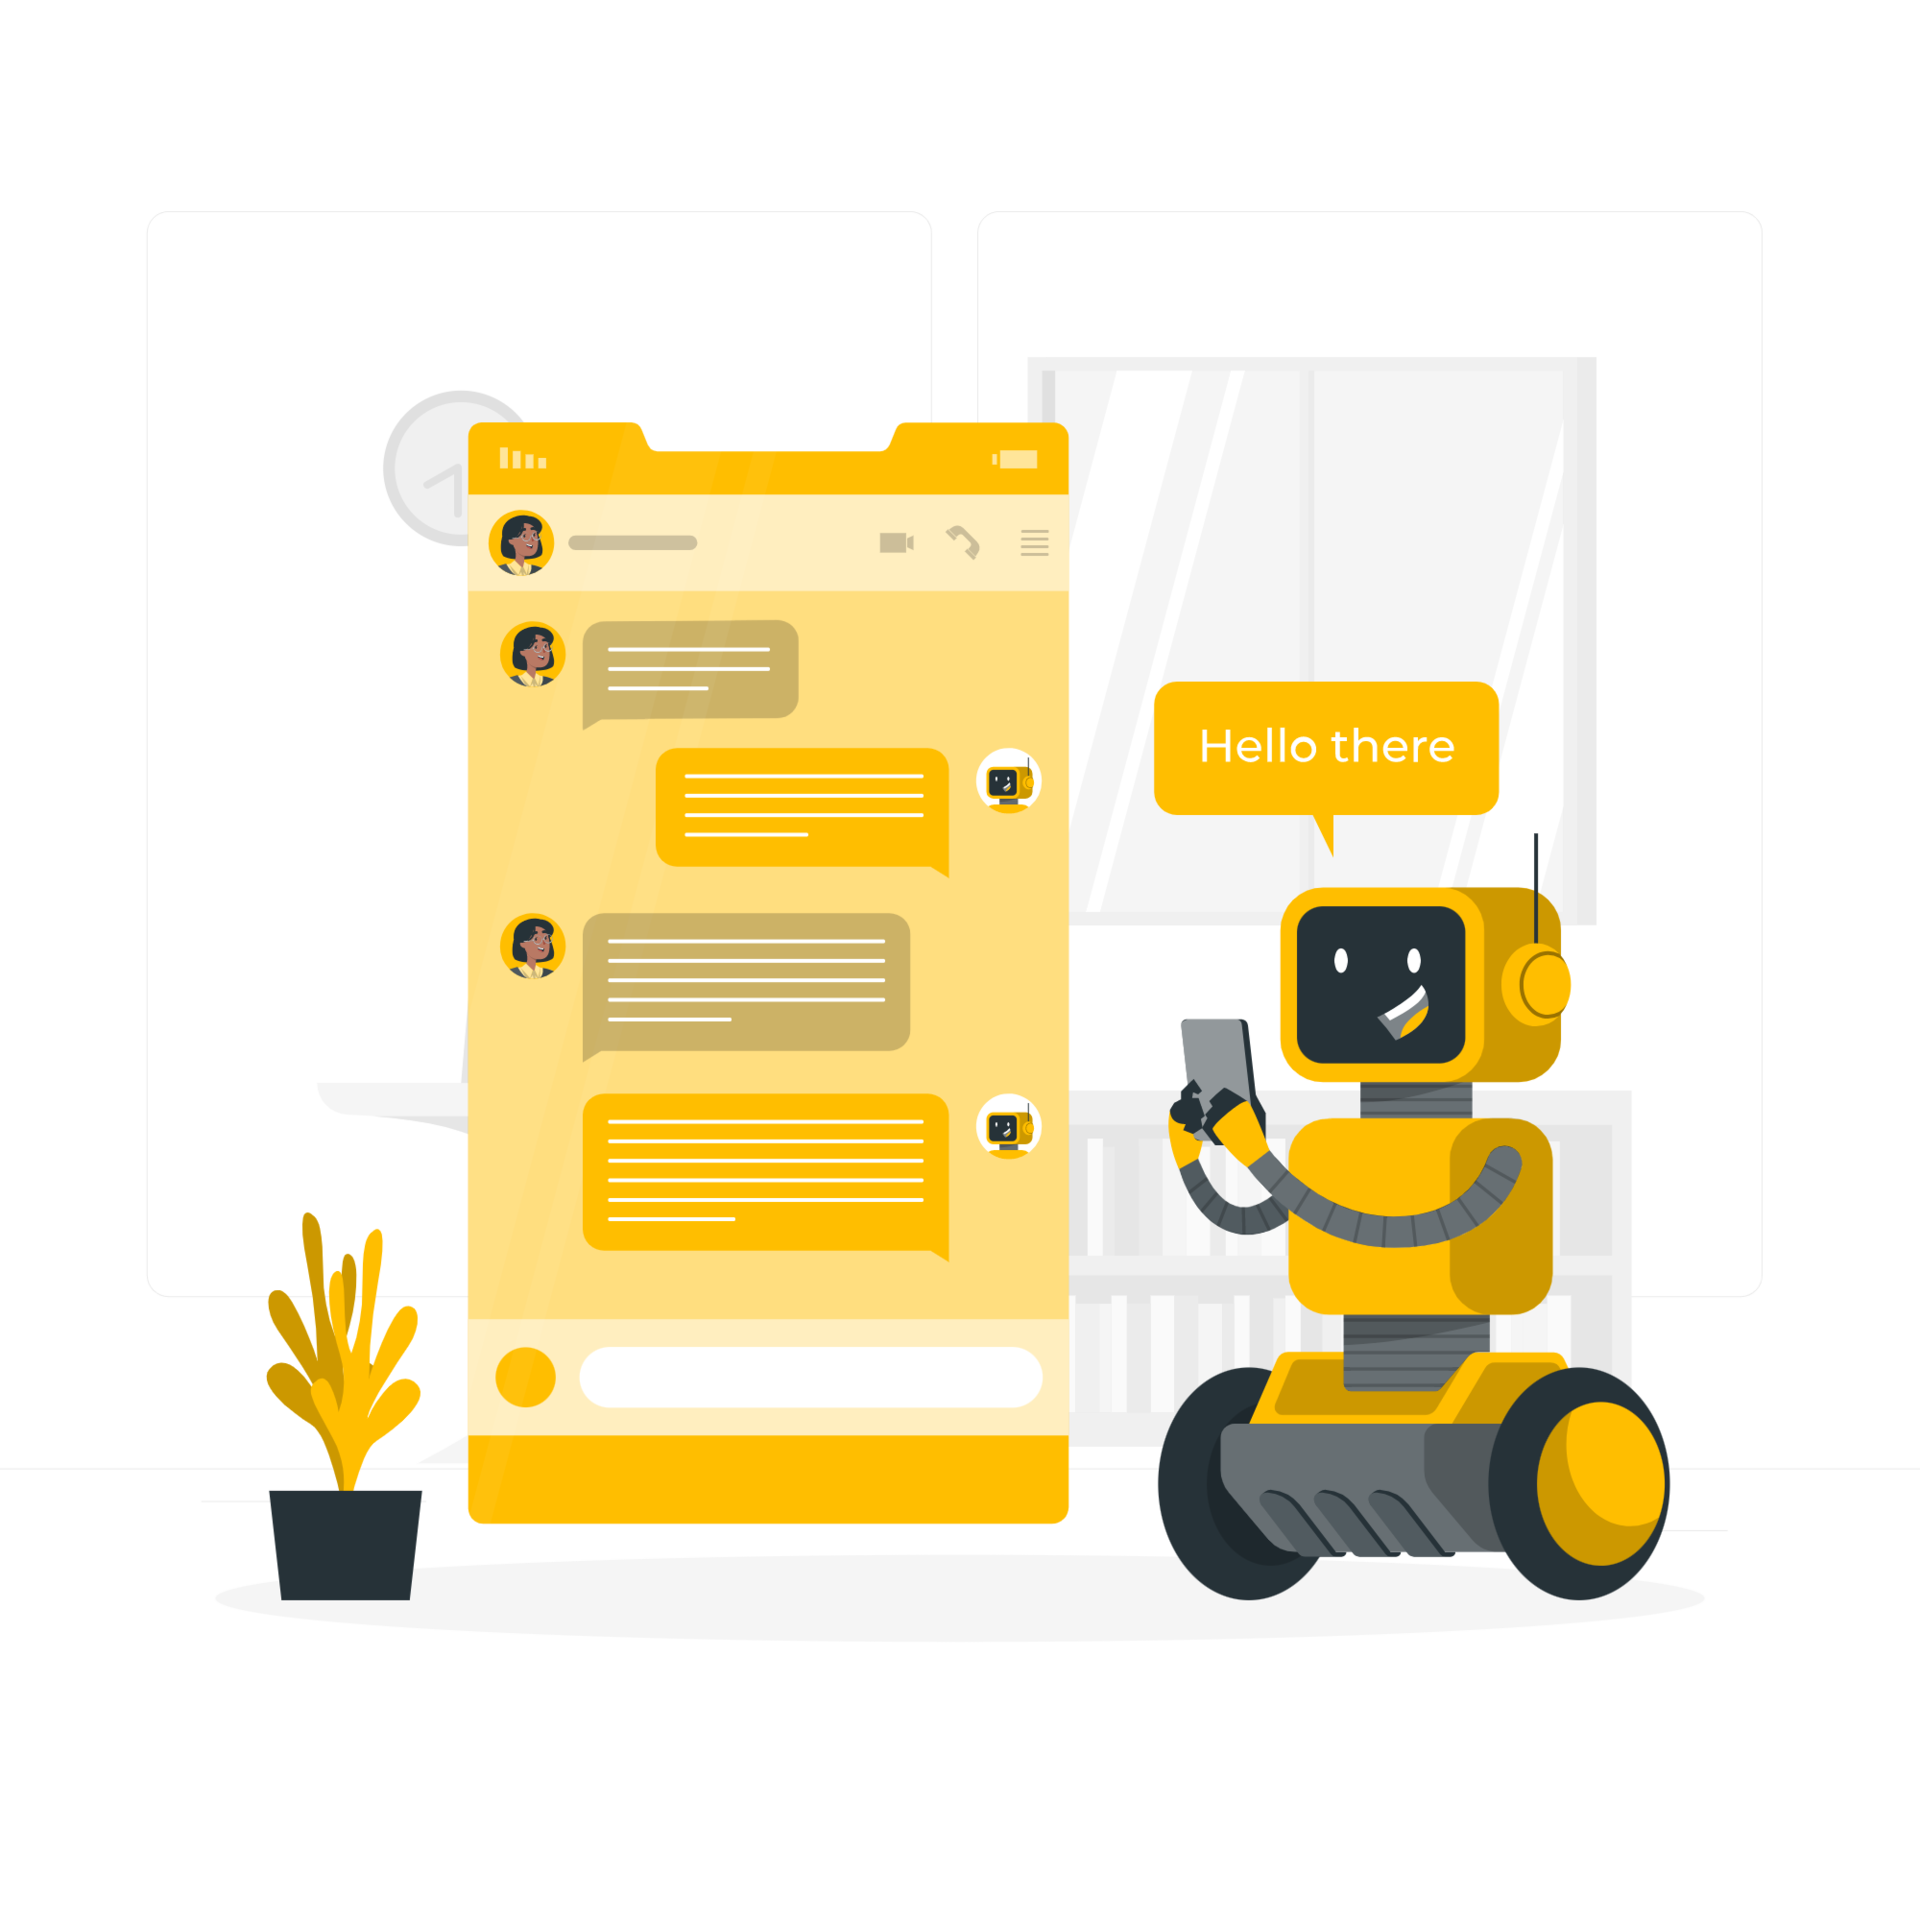 Workflow Automation With Chat Bots